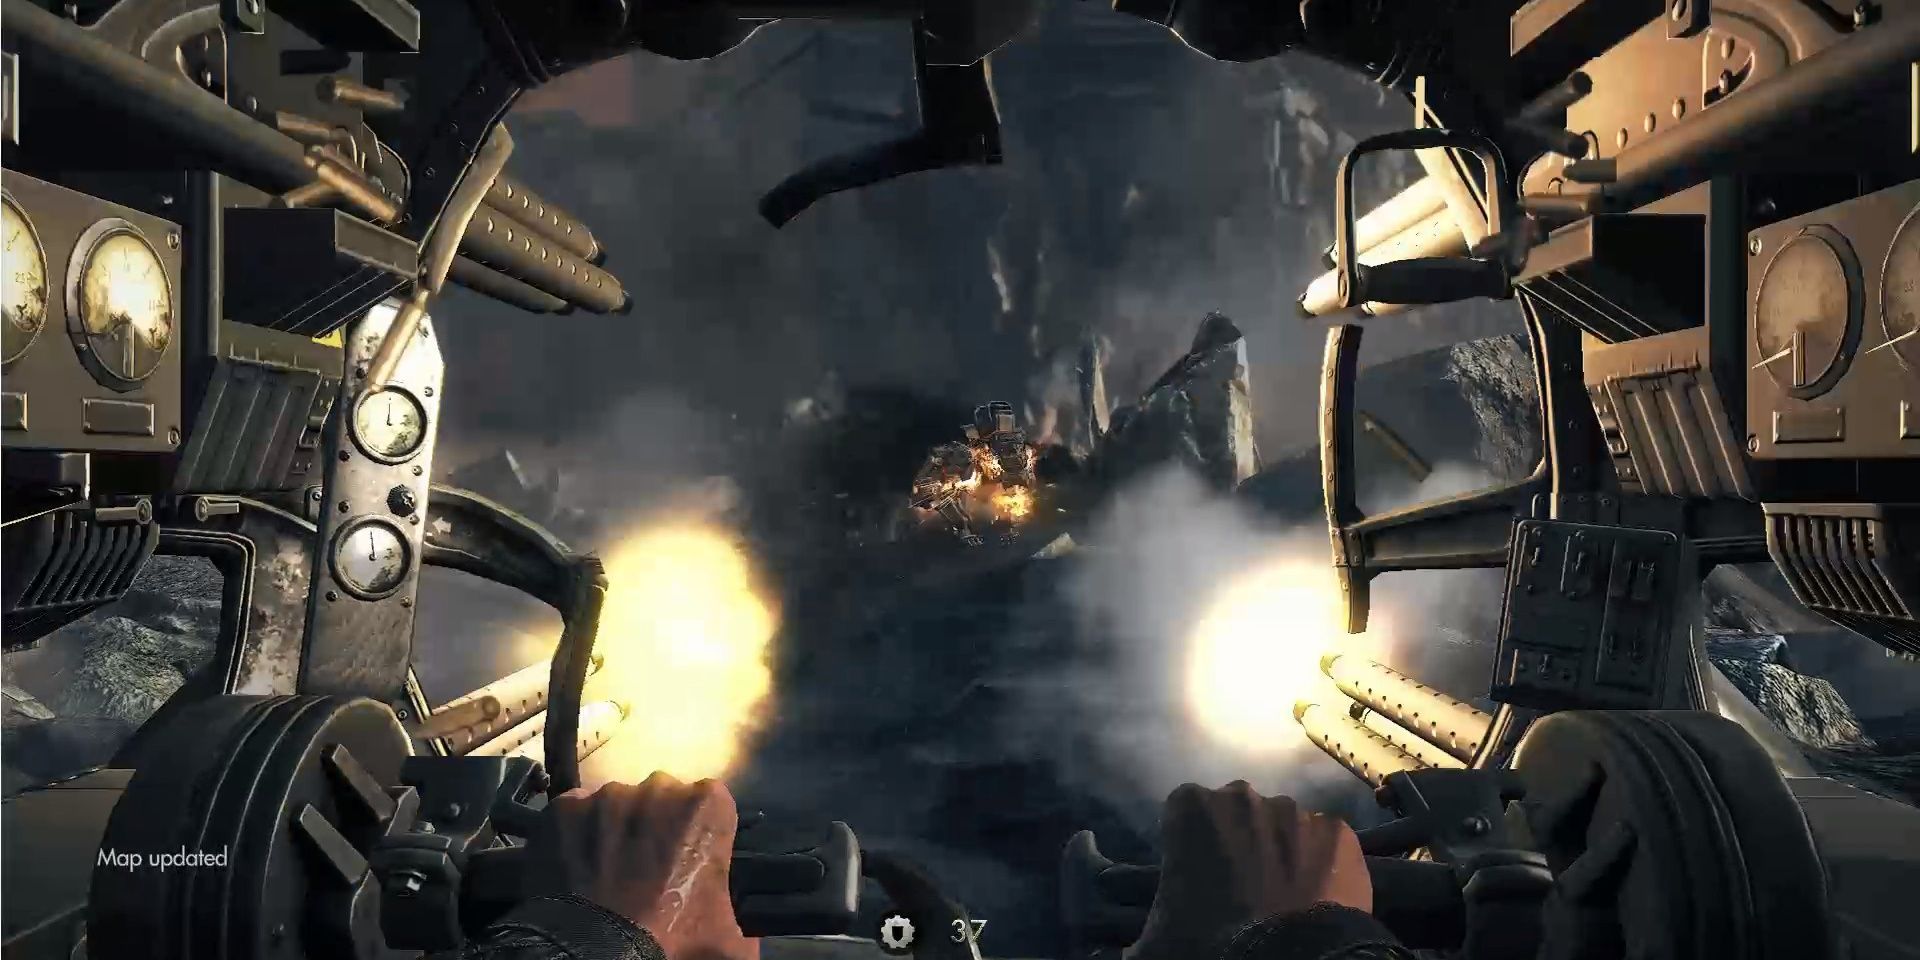 Image of Blazkowicz in the cockpit and destroying the monsters in Wolfenstein: The New Order.